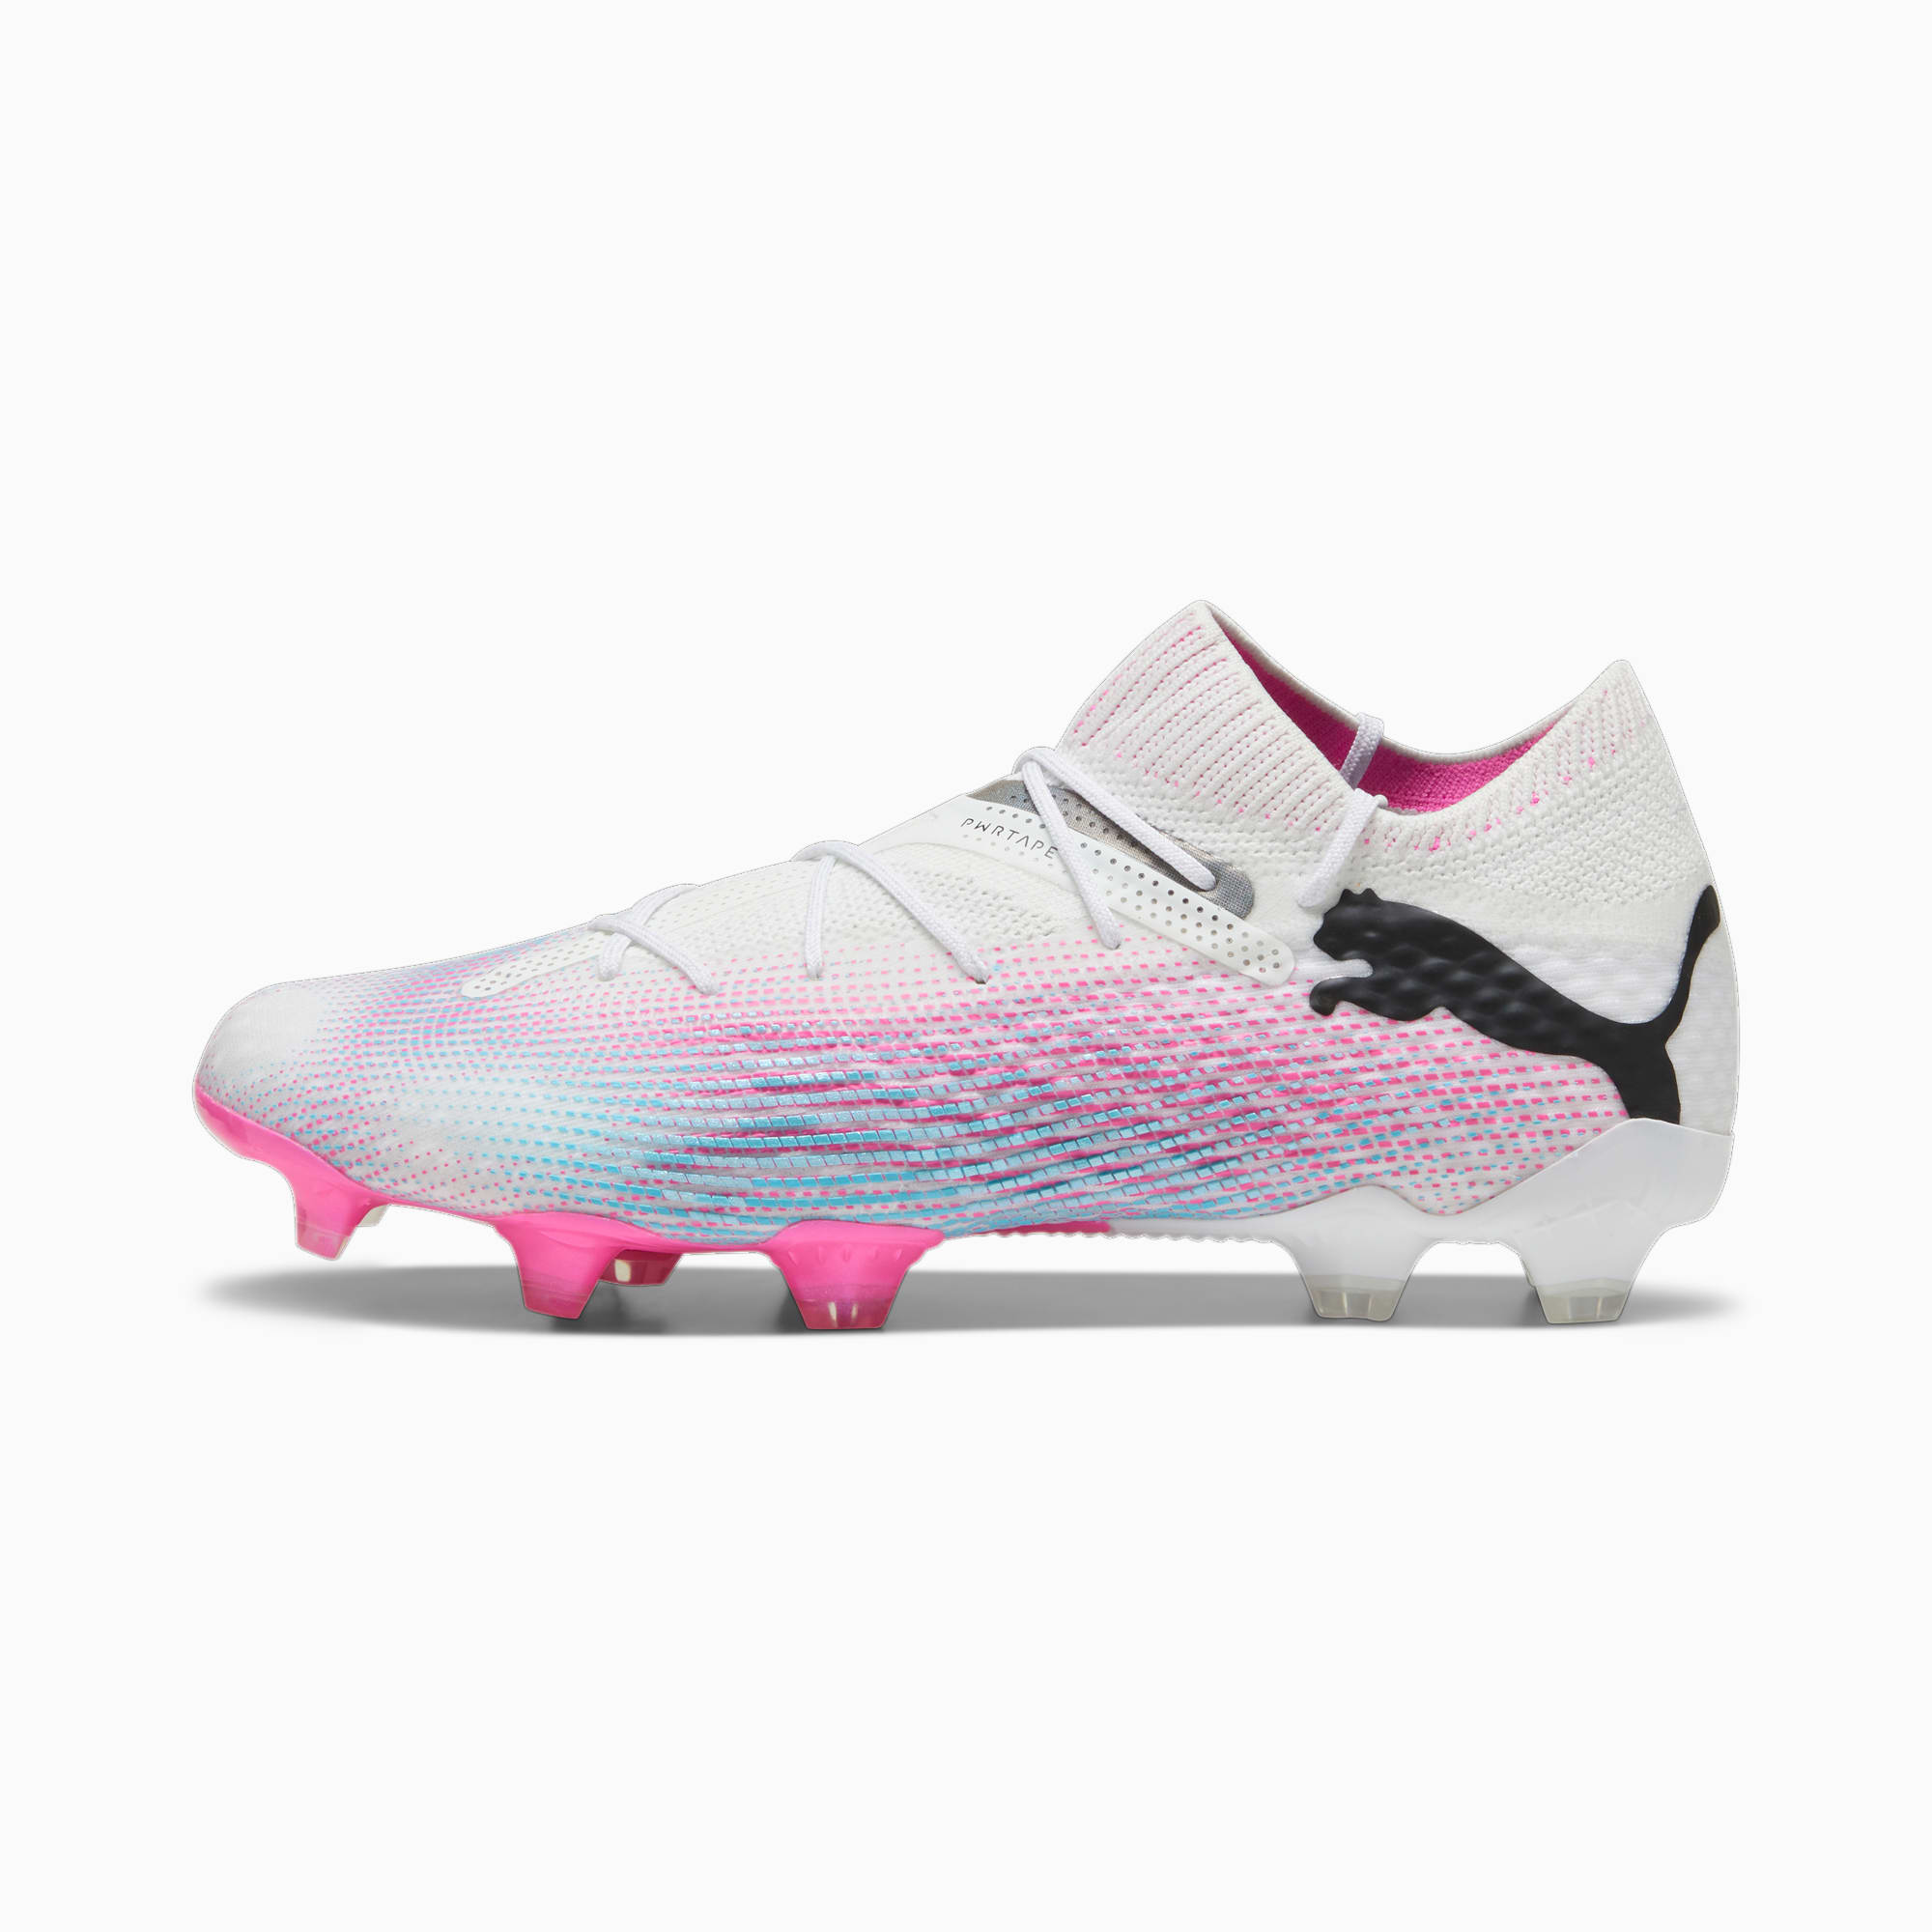 FUTURE 7 ULTIMATE Firm Ground/Arificial Ground Men's Soccer Cleats